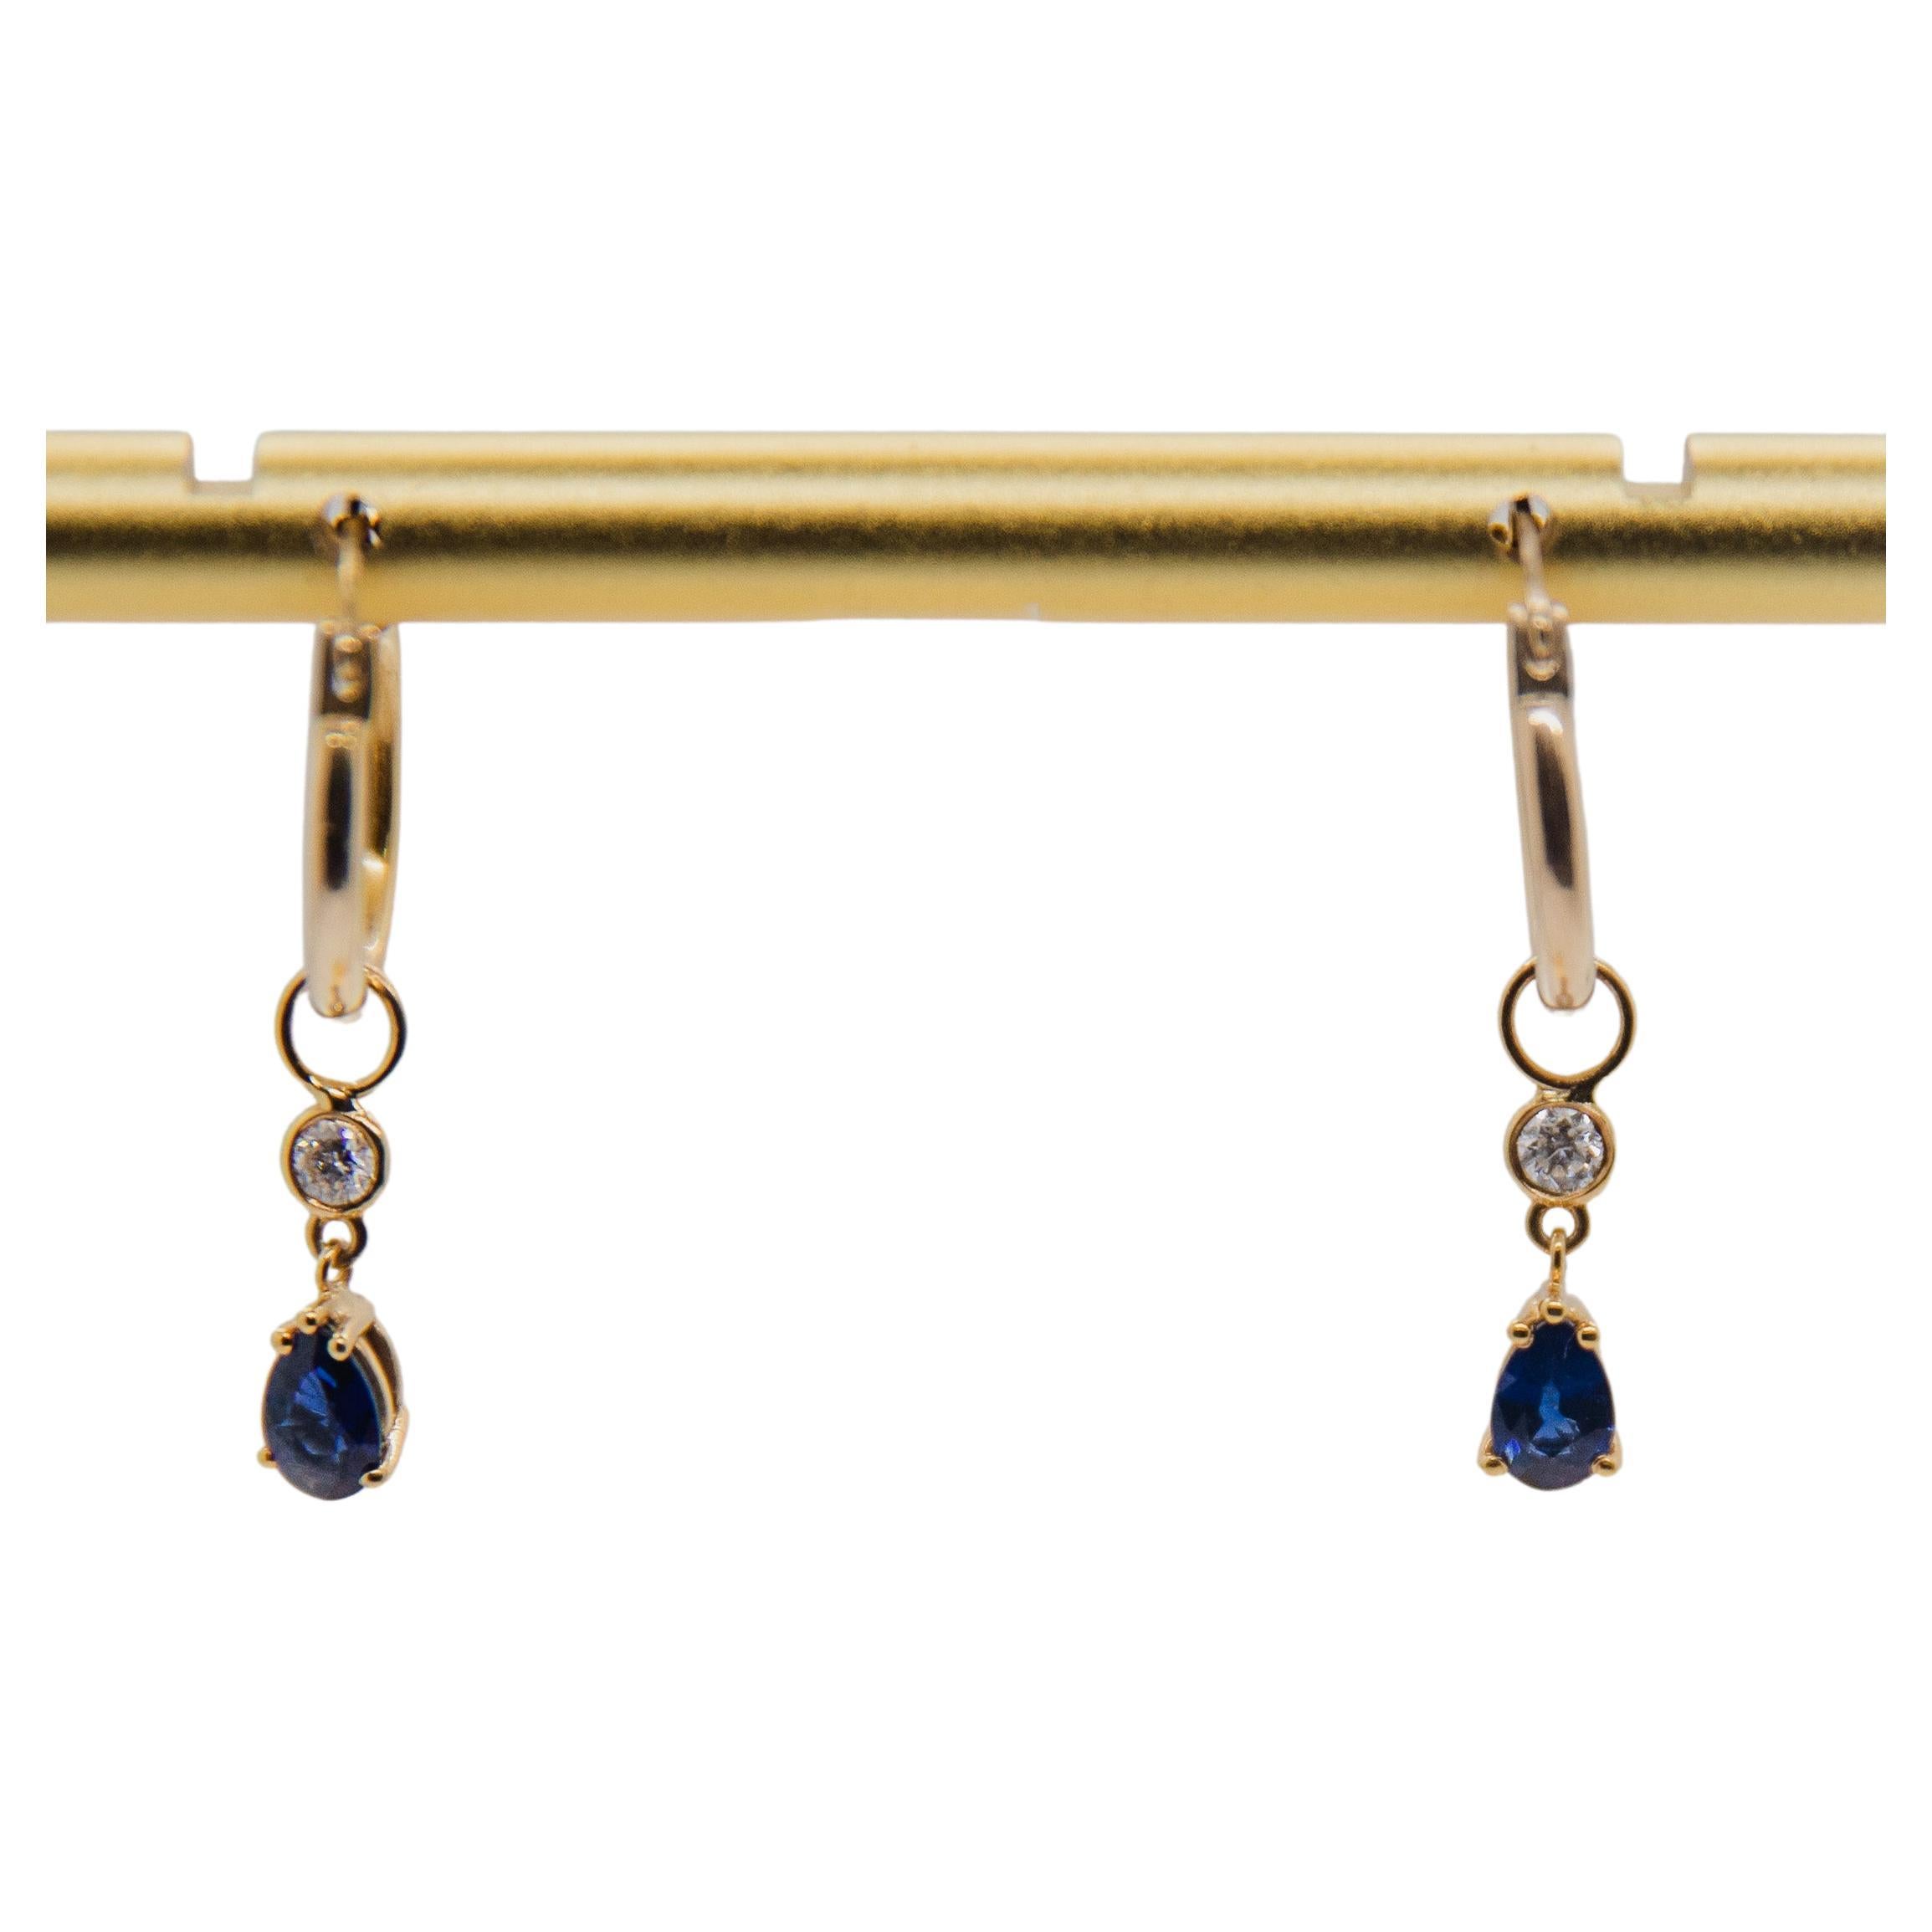 Detachable 1.20 Carat Sapphire and Diamond Charm Earring with Hoop Earring For Sale